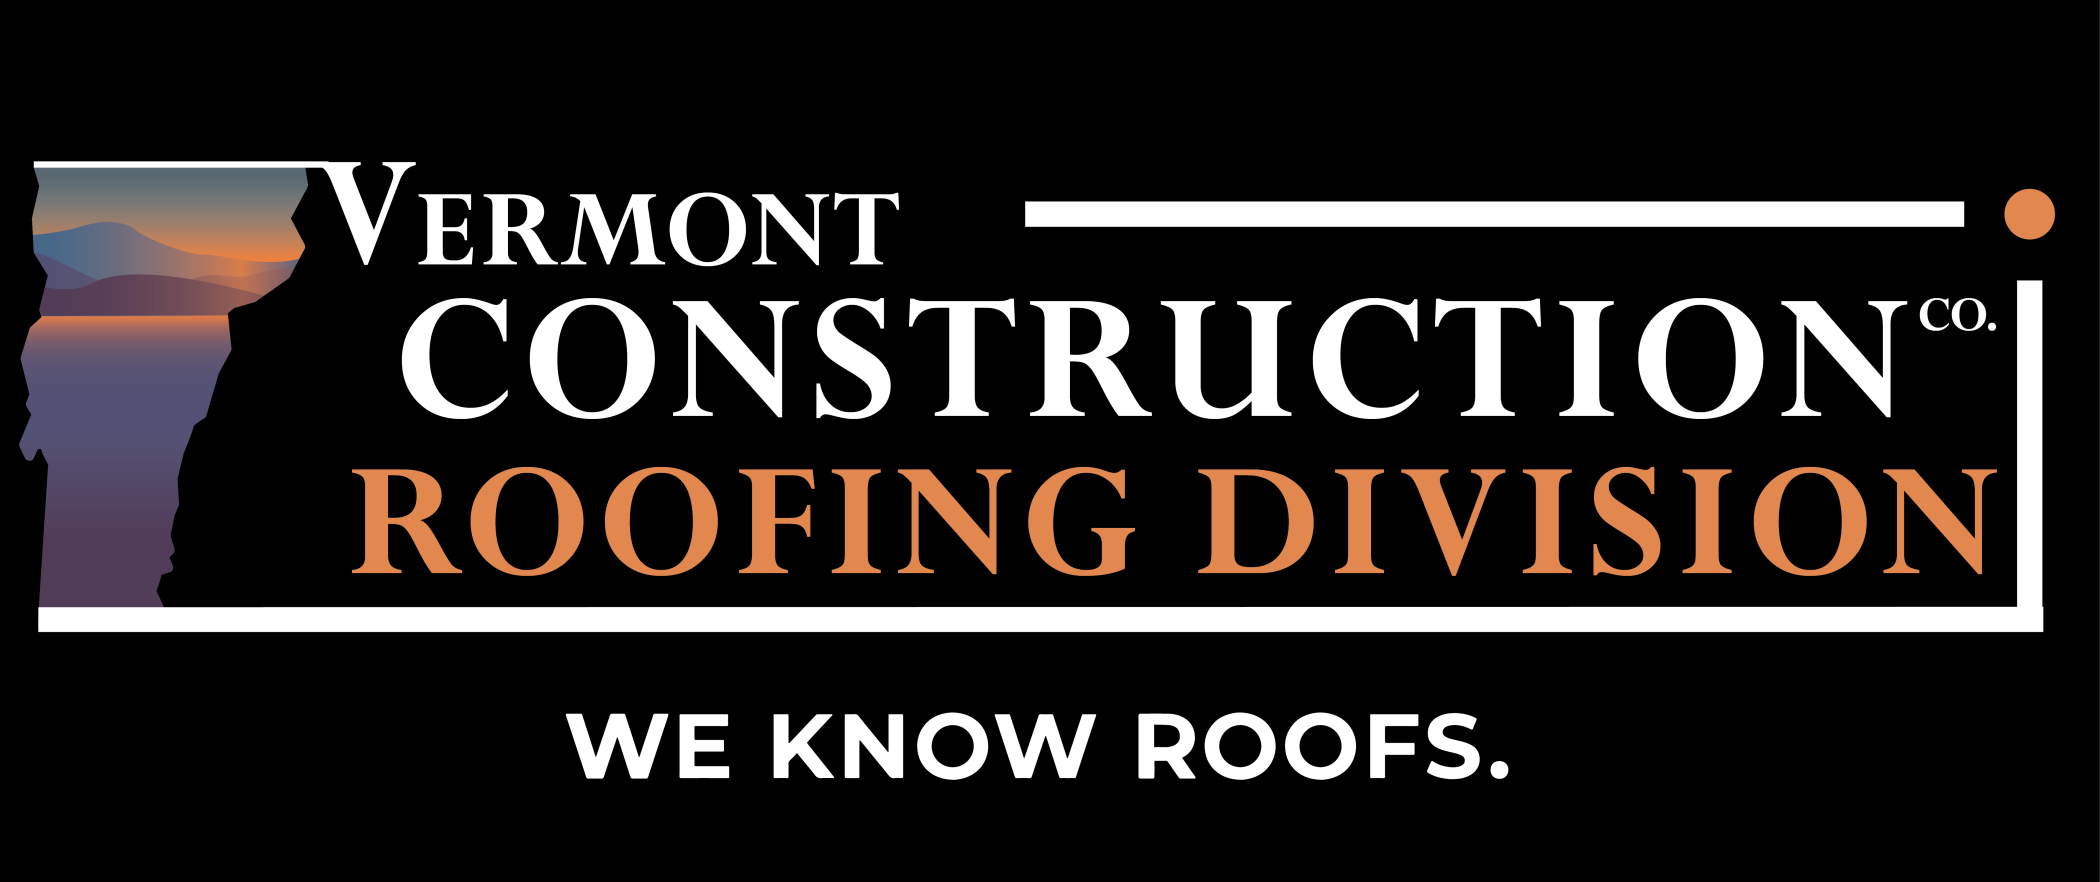 VCCMASTER_BLACK_LOGO_VT_ROOFING_DIVISION_WE_KNOW_ROOFS.png